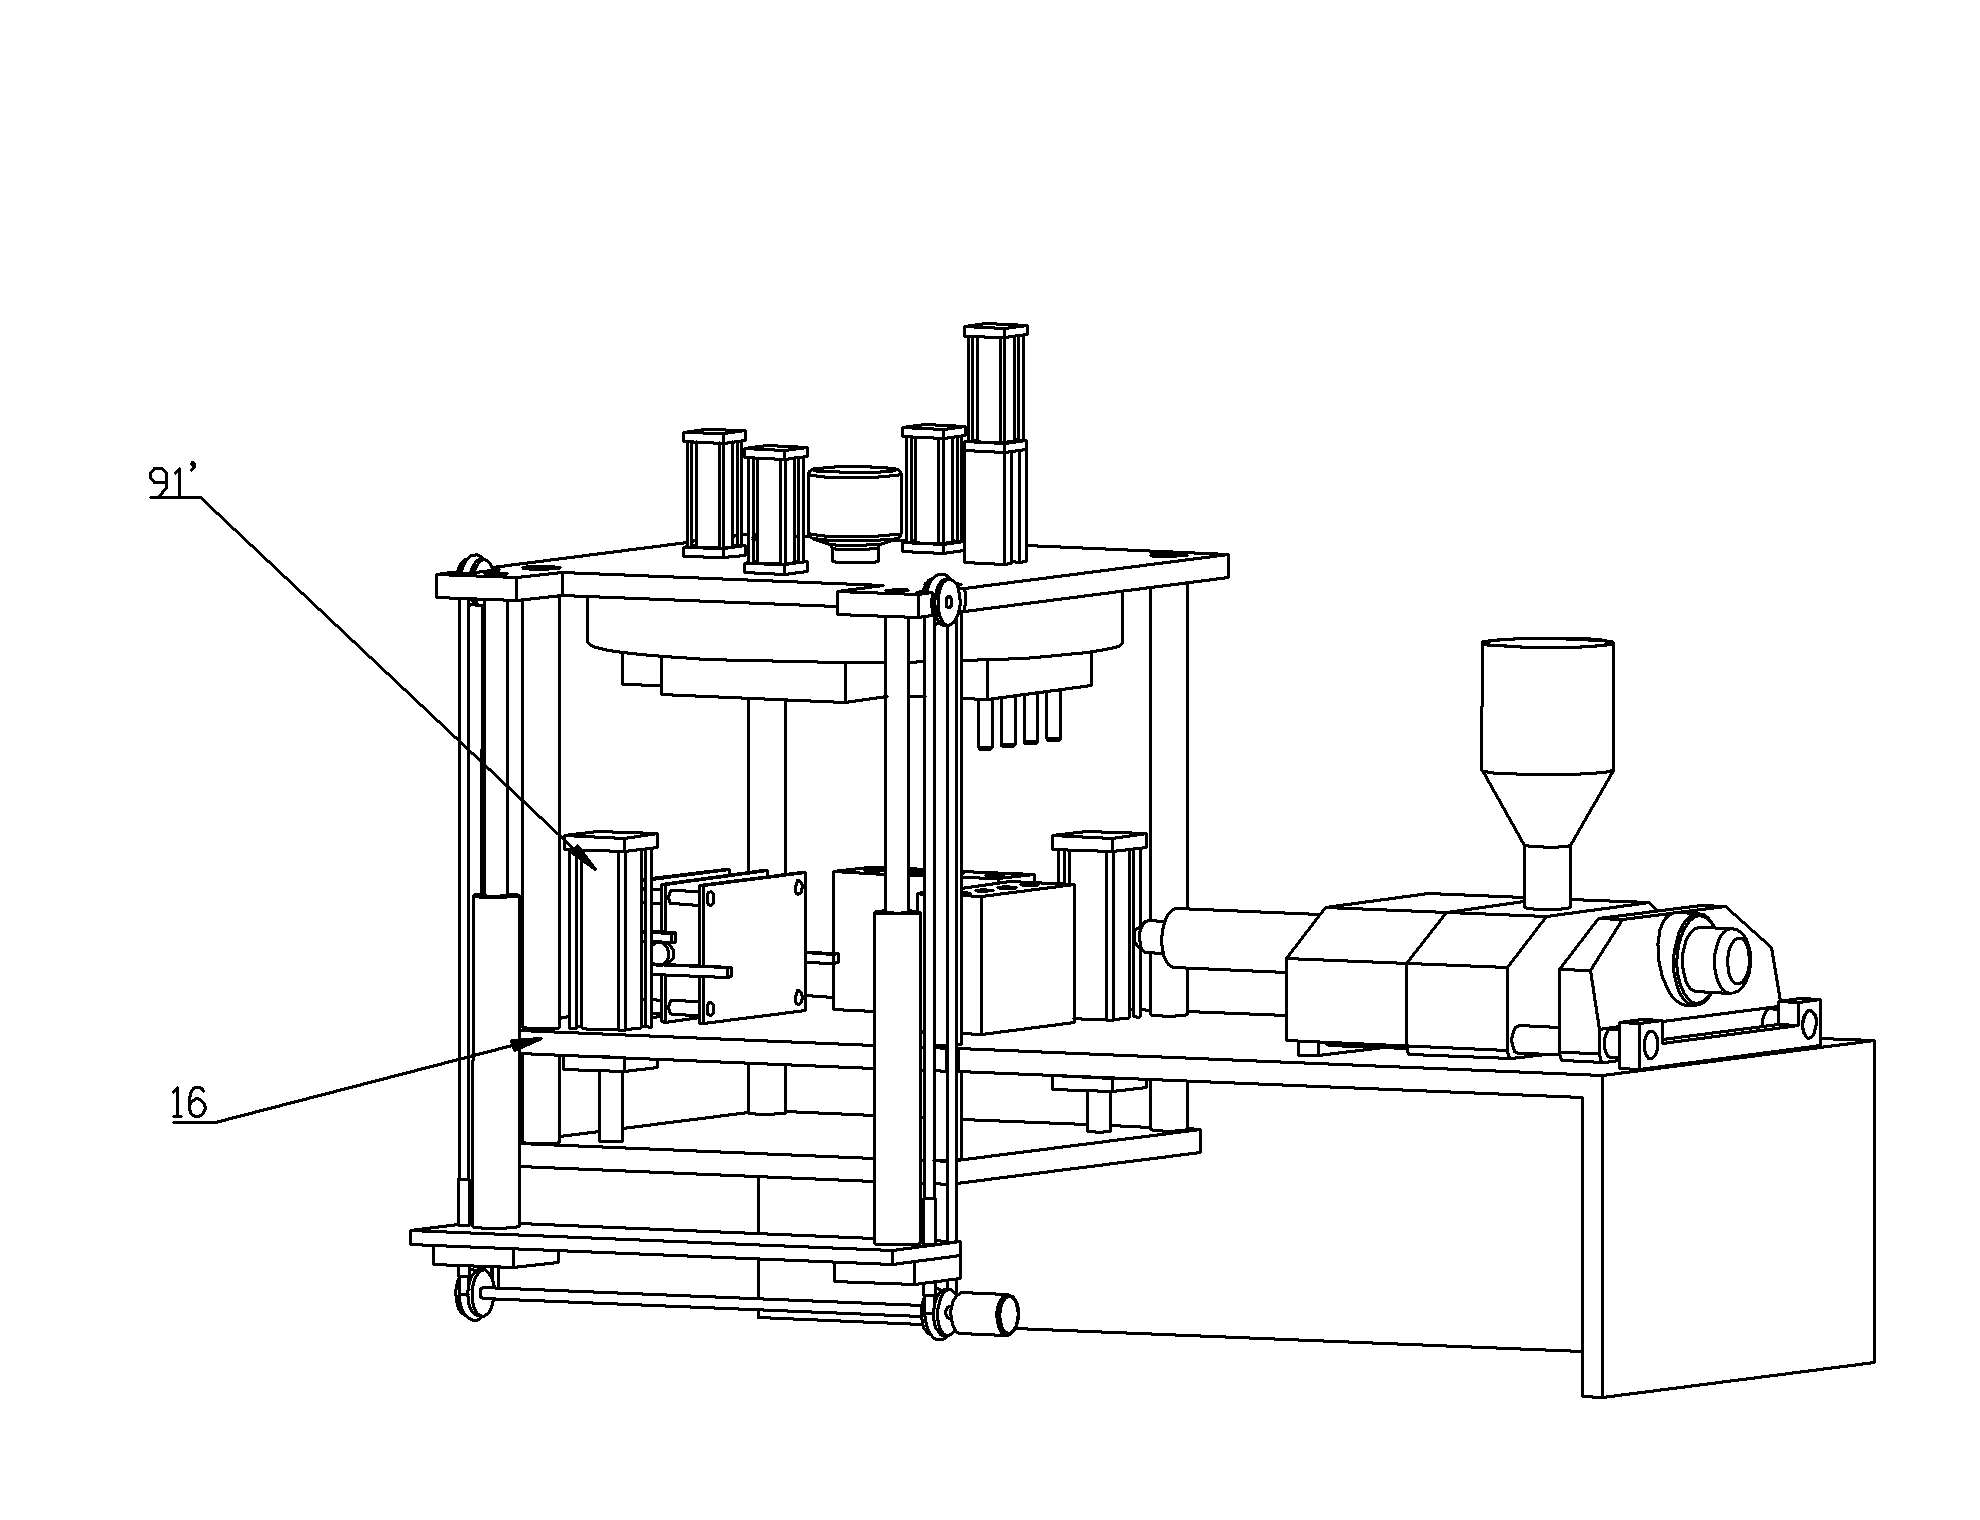 Hollow forming machine for one-step injection, drawing and blowing of plastic